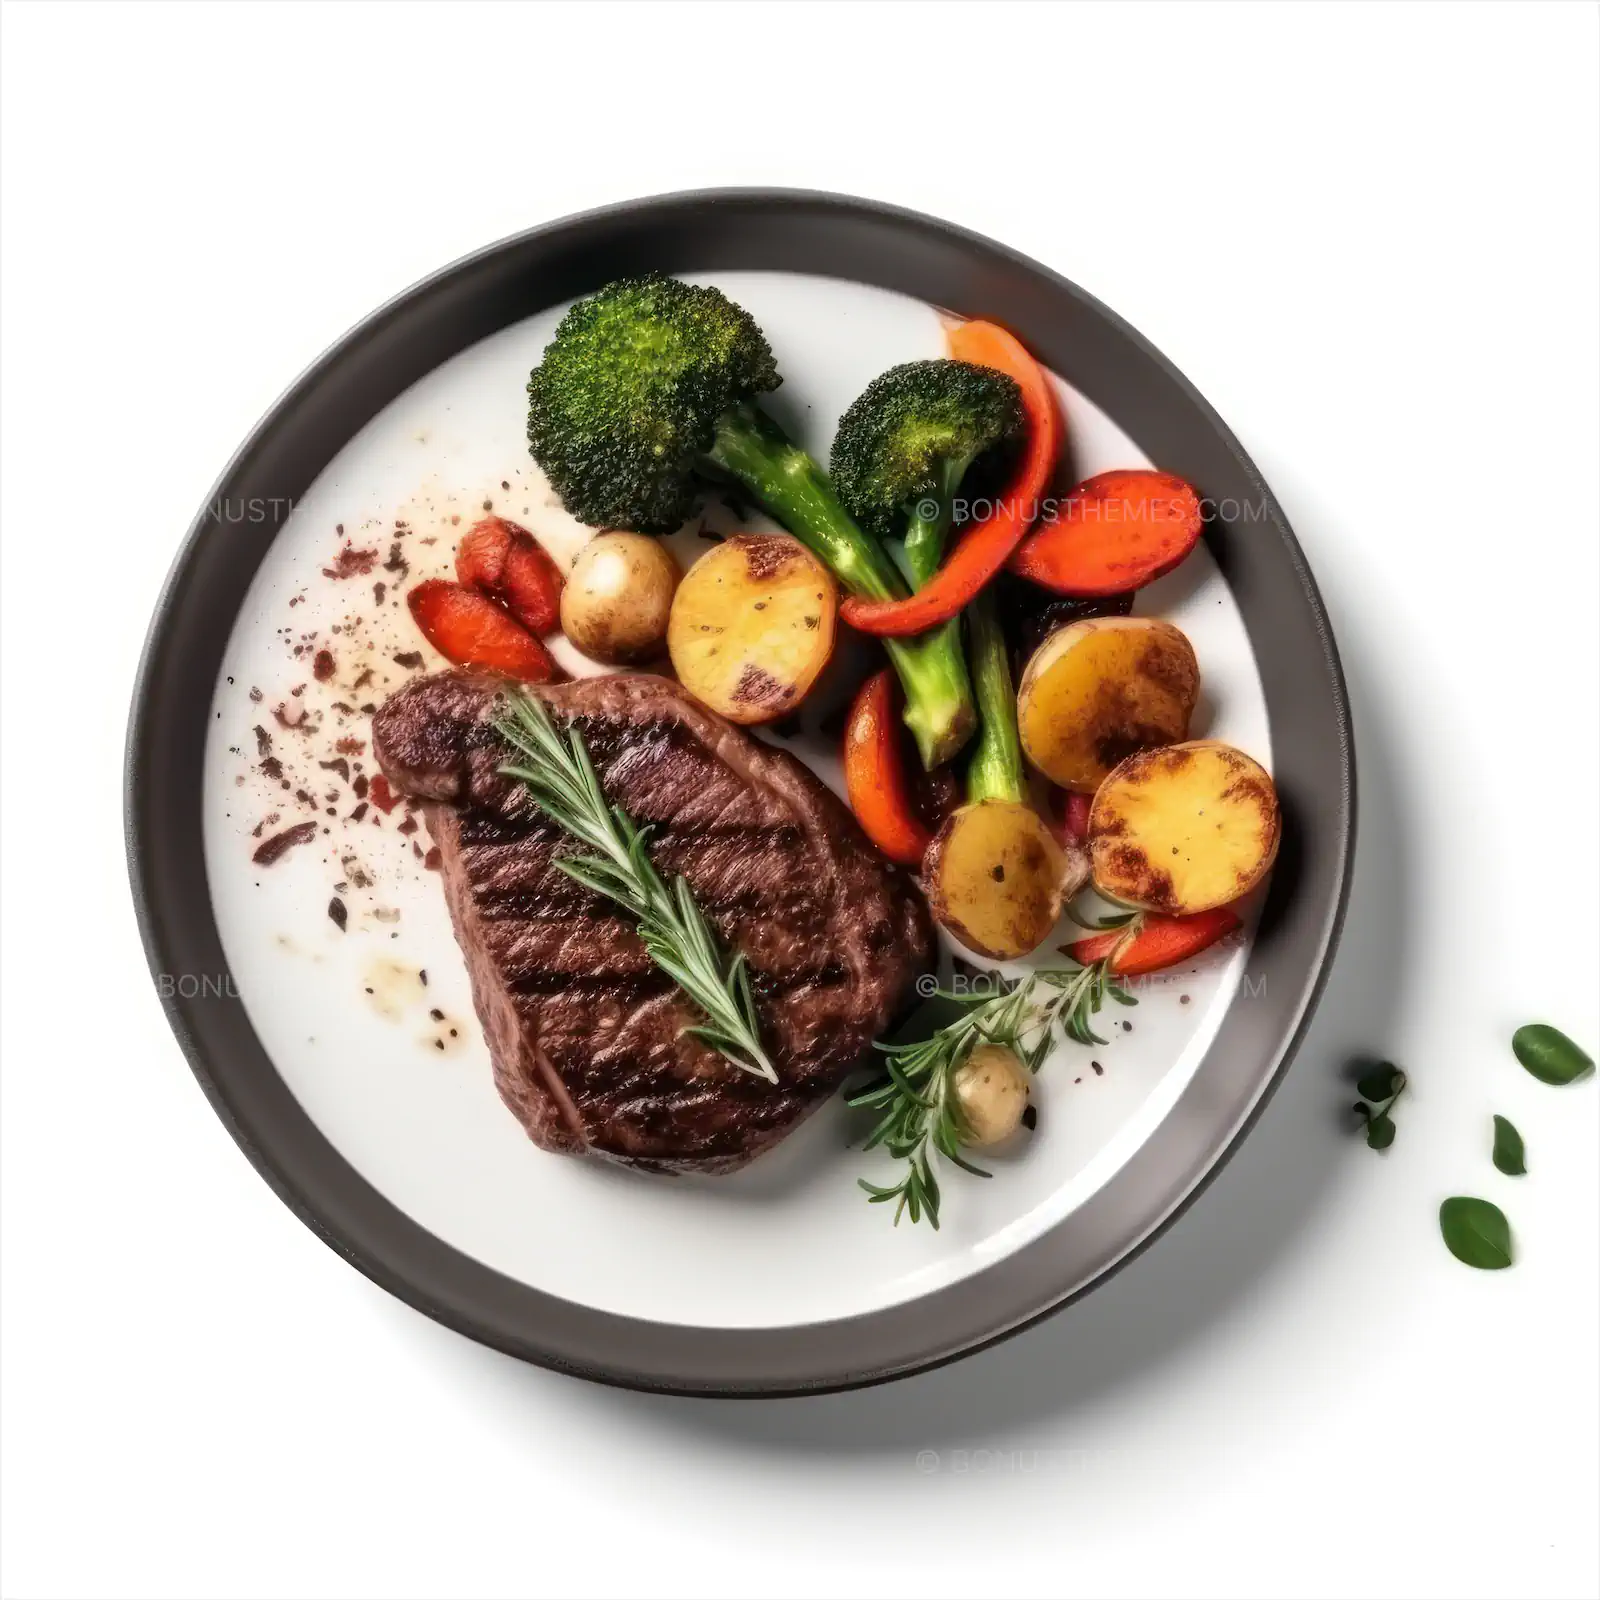 Succulent beef steak with grilled mixed vegetables on a white background